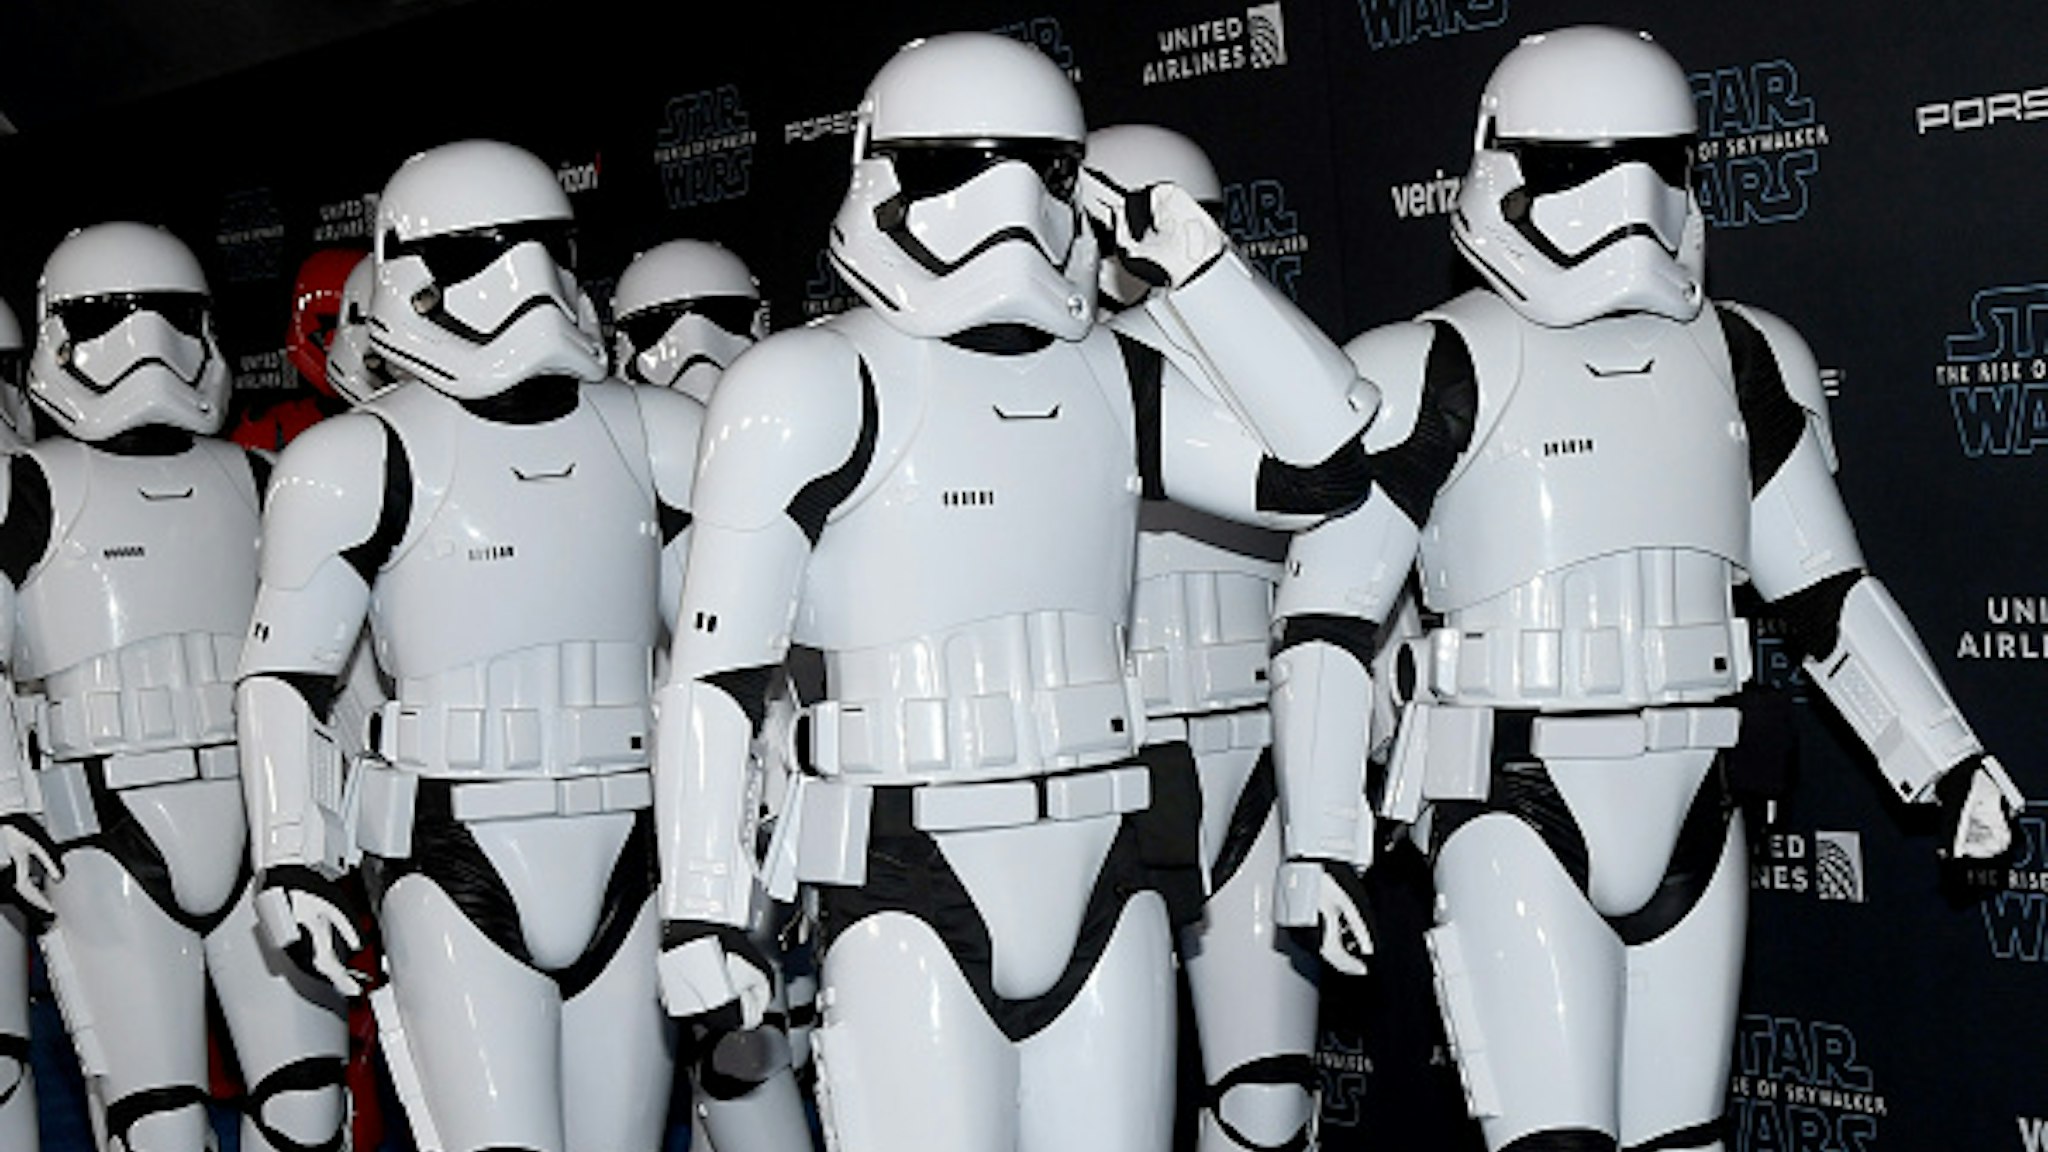 HOLLYWOOD, CALIFORNIA - DECEMBER 16: Stormtrooper characters arrive at the premiere of Disney's "Star Wars: The Rise of Skywalker" on December 16, 2019 in Hollywood, California.